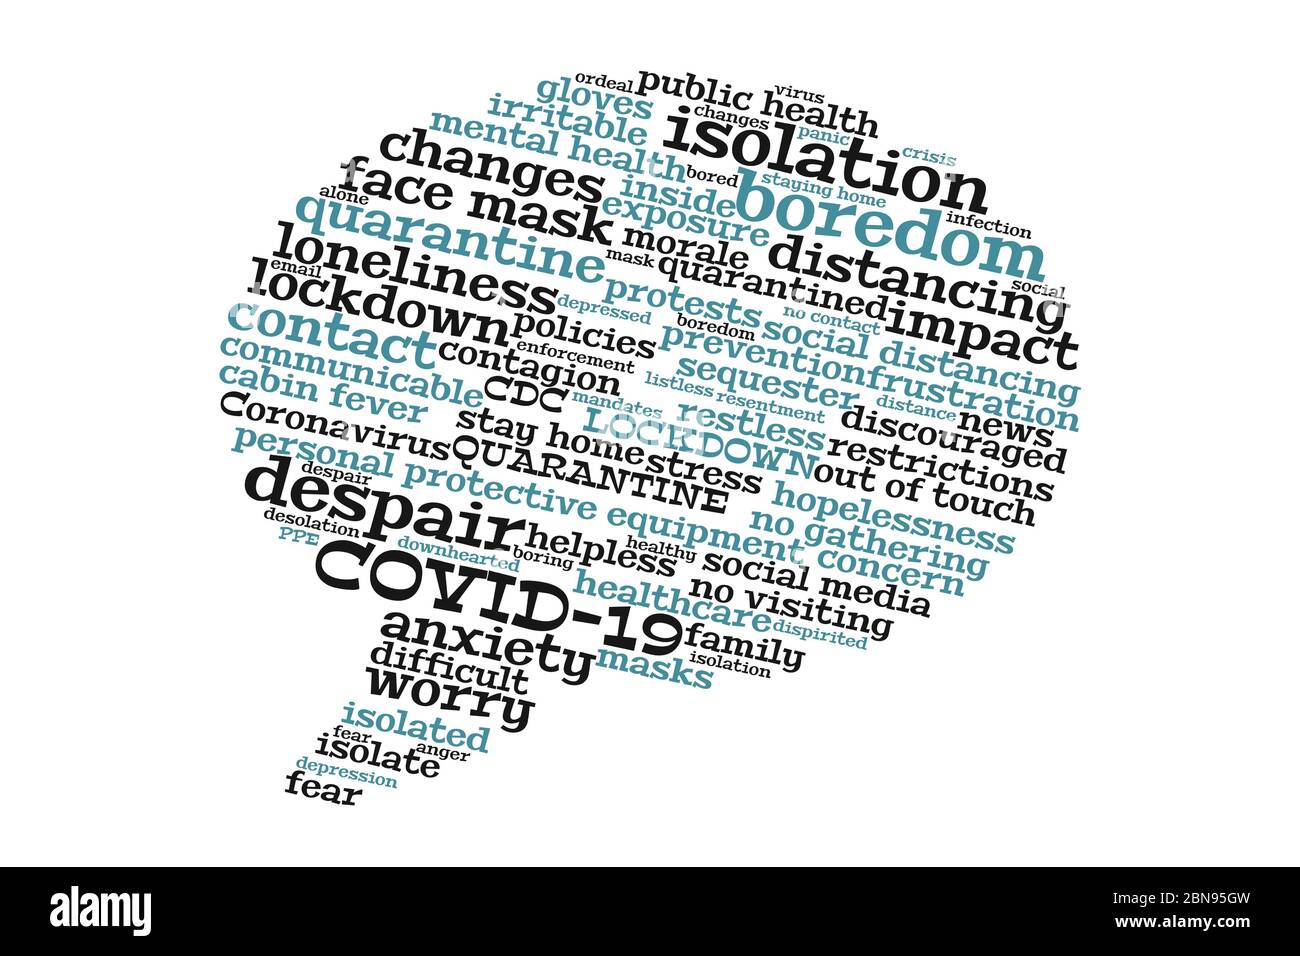 Word cloud in the shape of a speech bubble about coronavirus, social distancing and the changes people are facing as a result, COVID-19 Stock Photo